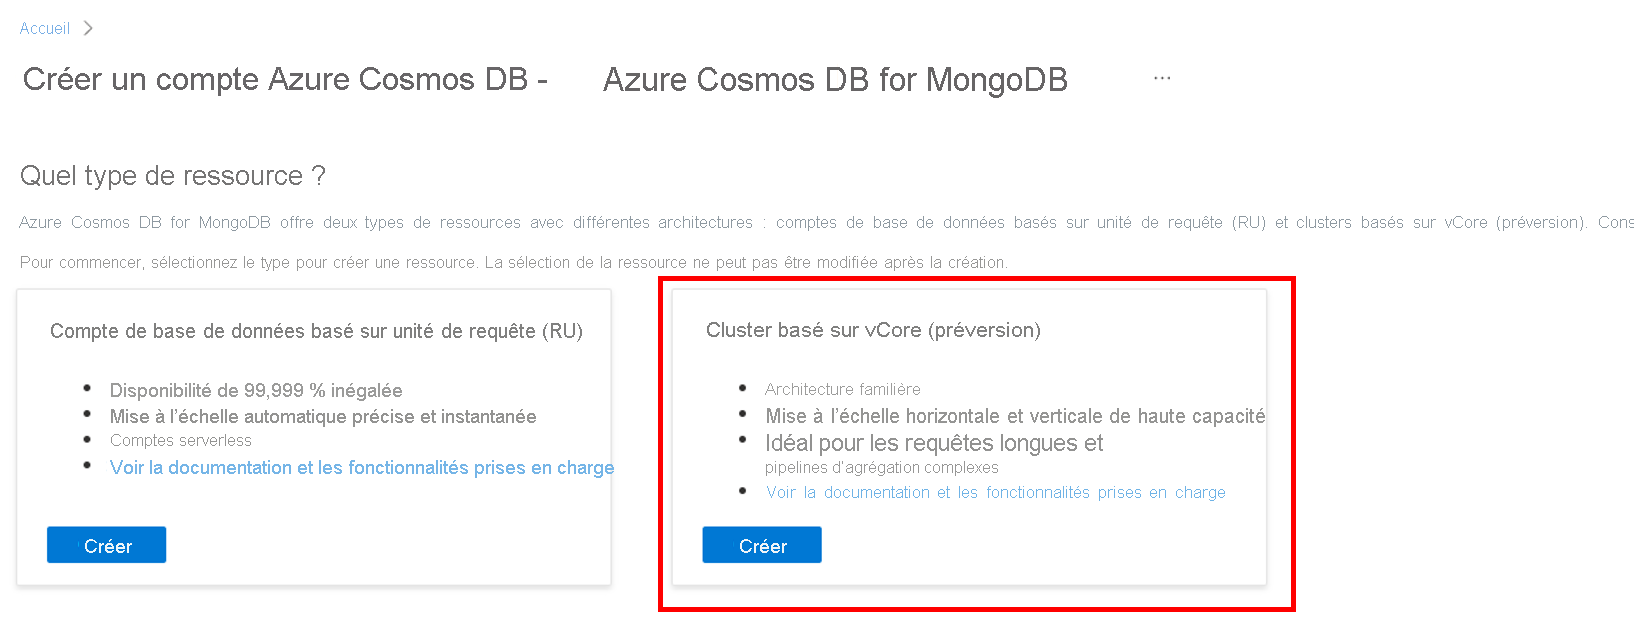 Screenshot of the select resource type option page for Azure Cosmos DB for MongoDB.